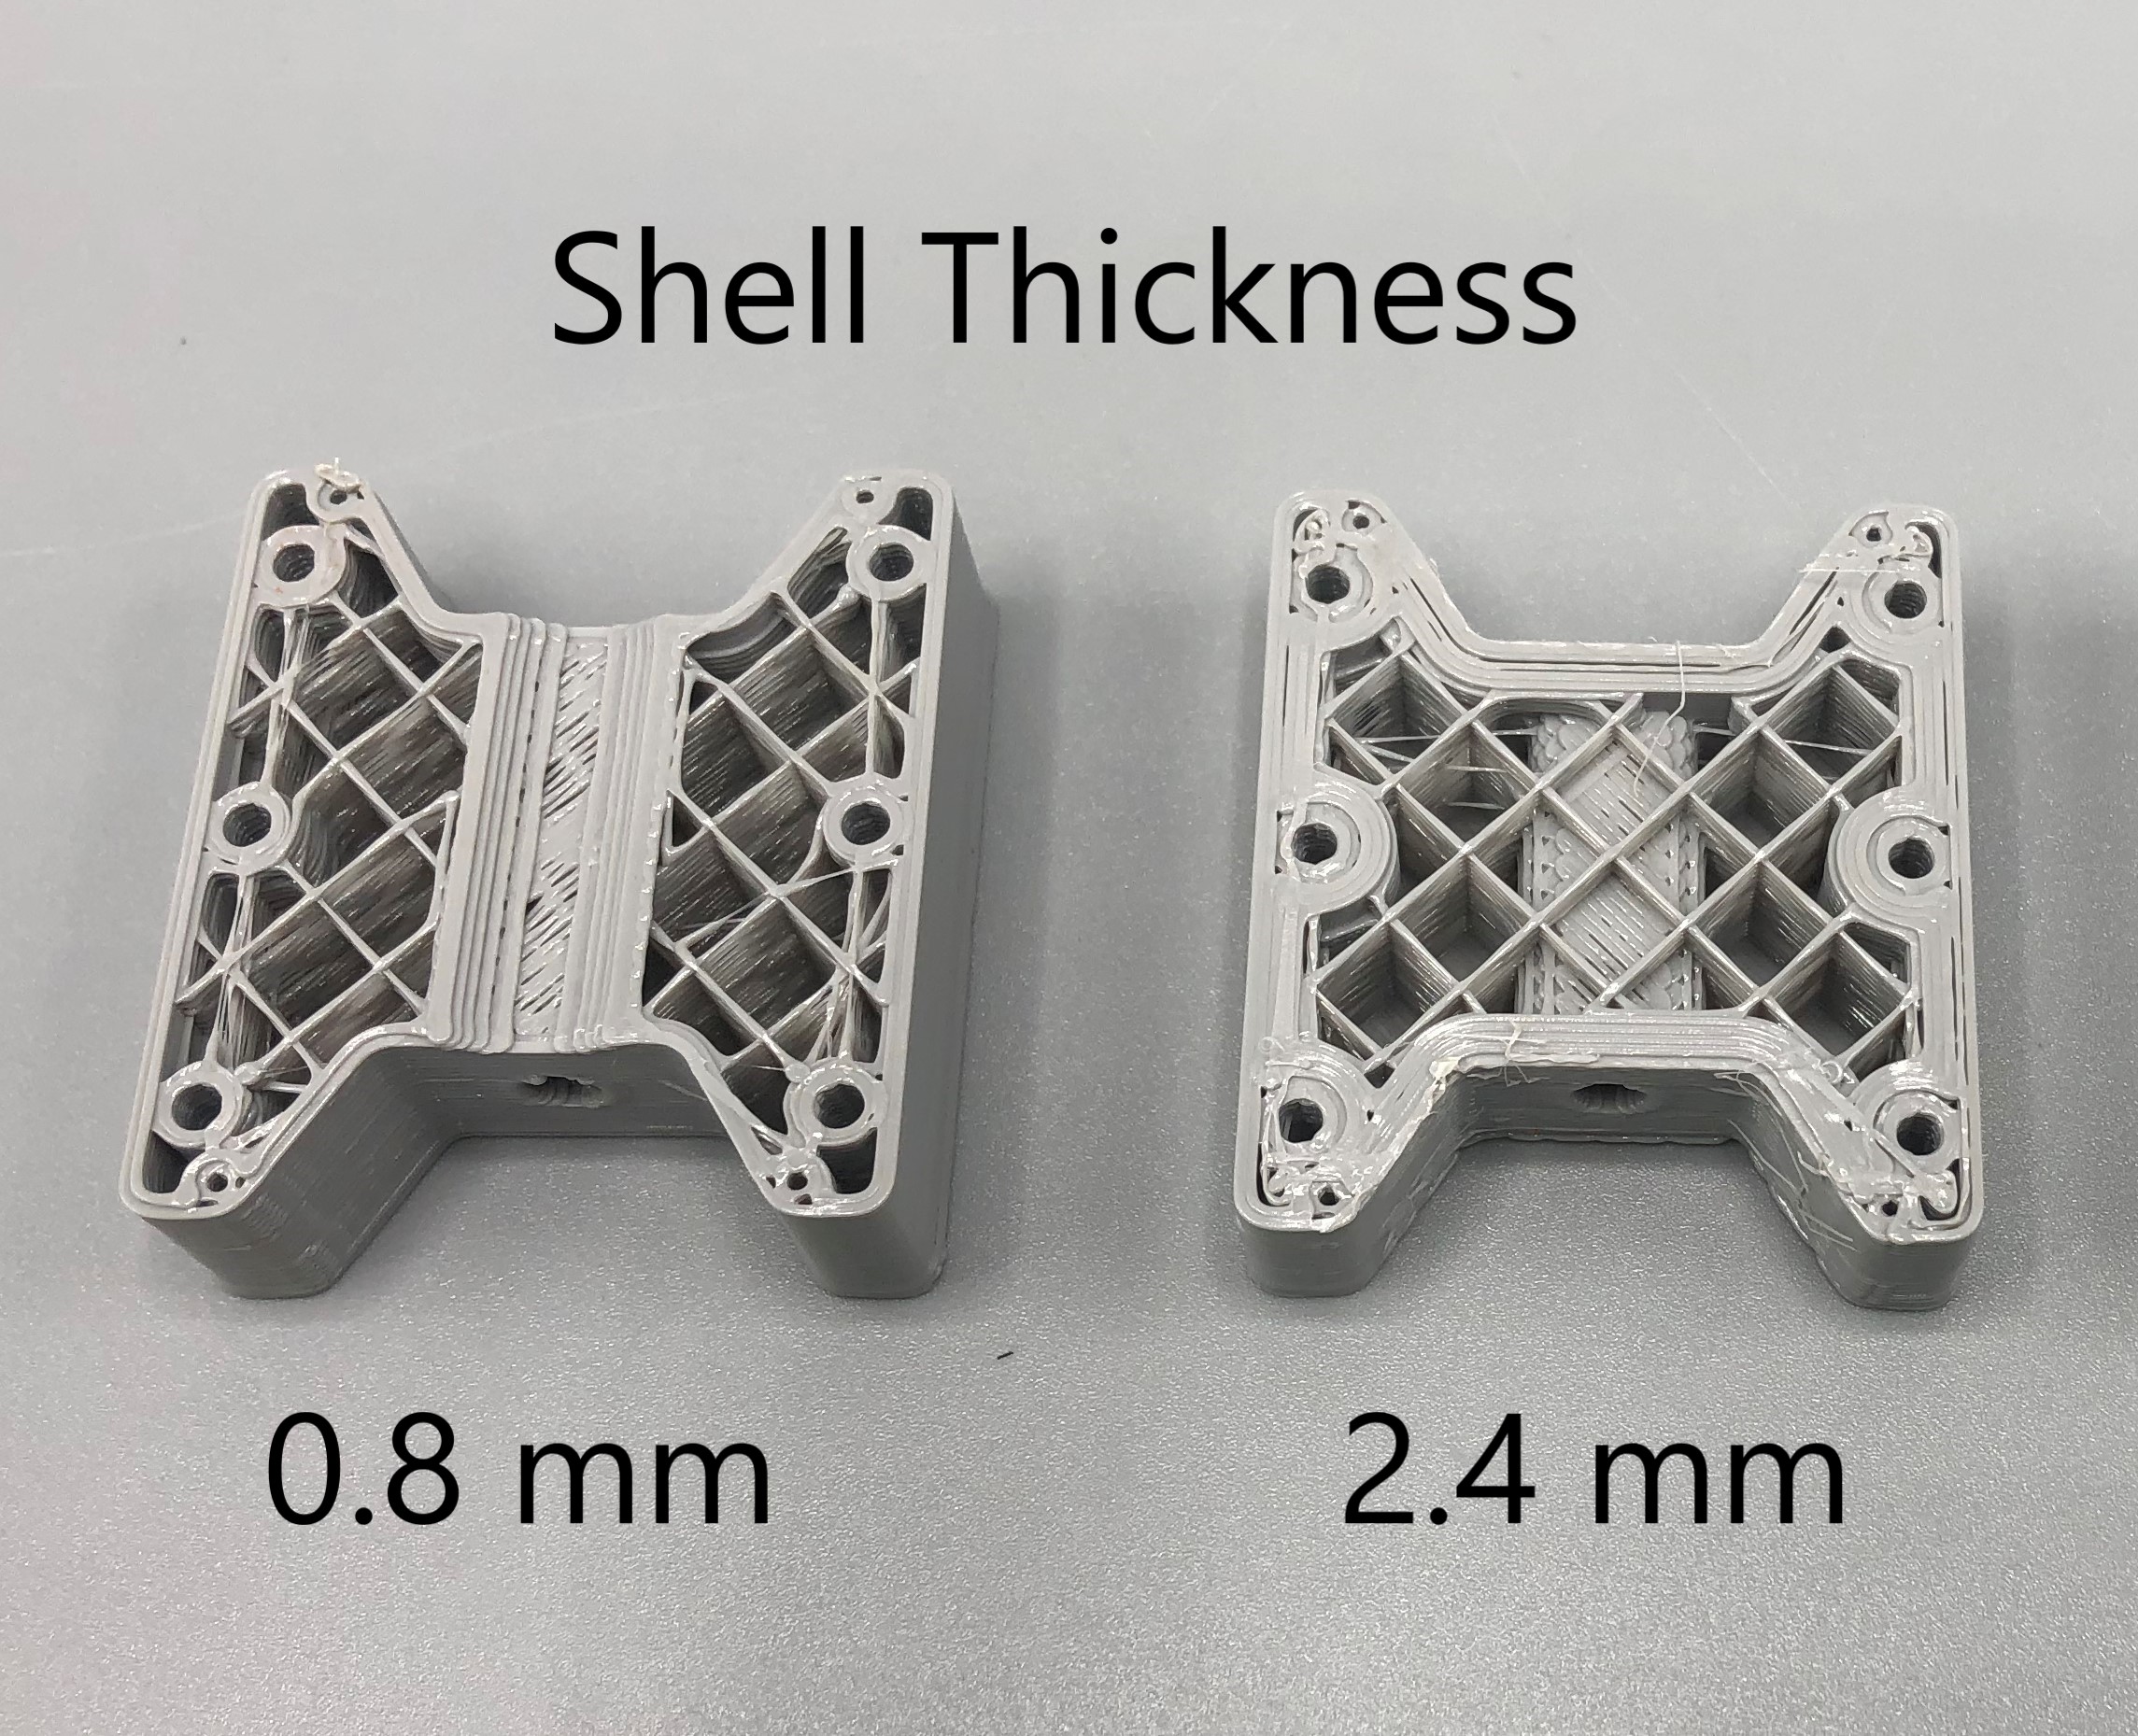 Forstyrre Behandle pop Optimizing Strength of 3D Printed Parts — 3DPros